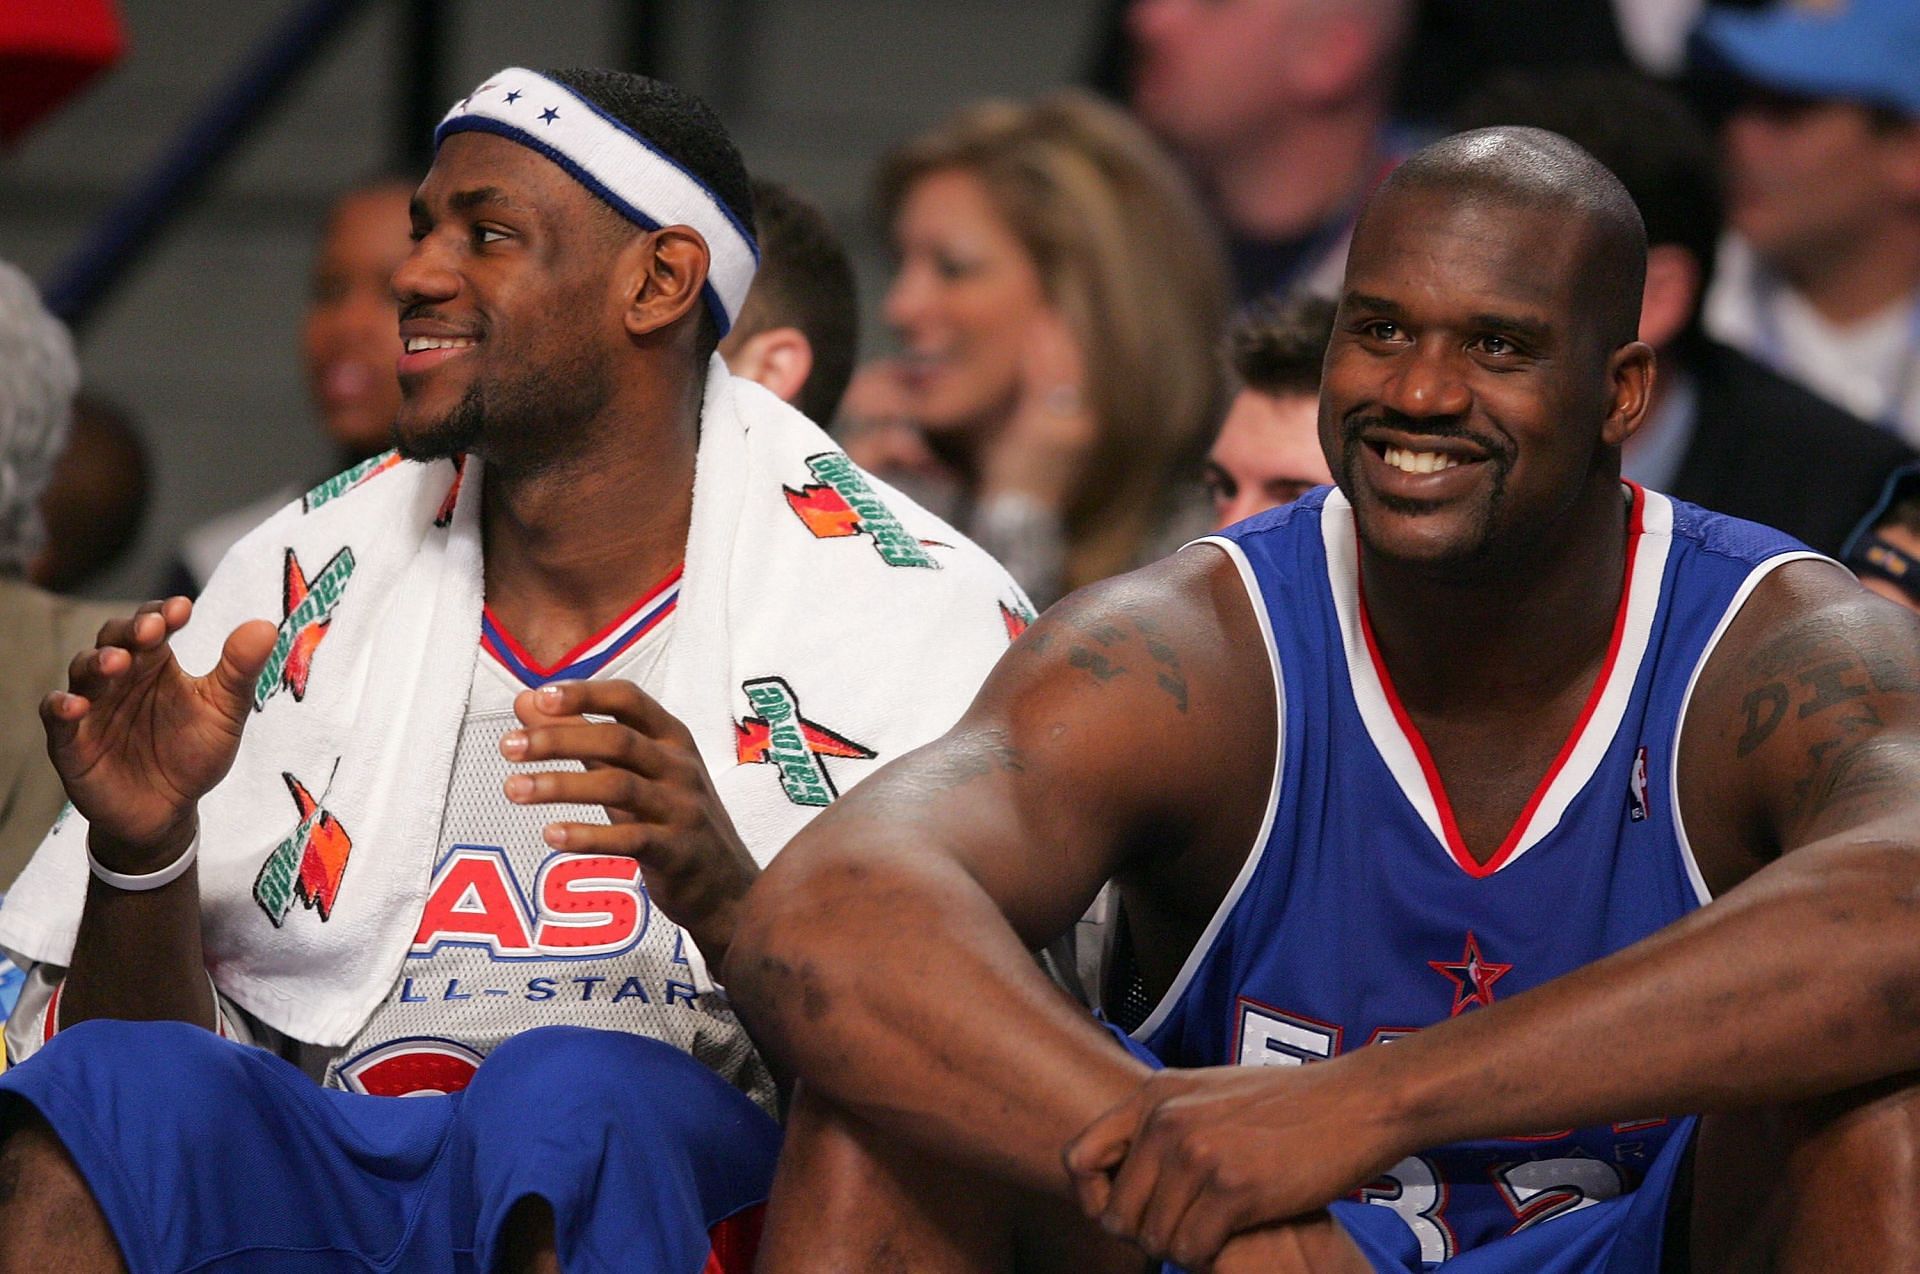 SHAQ REVEALS HIS FAVORITE NBA TEAM THAT HE PLAYED FOR 